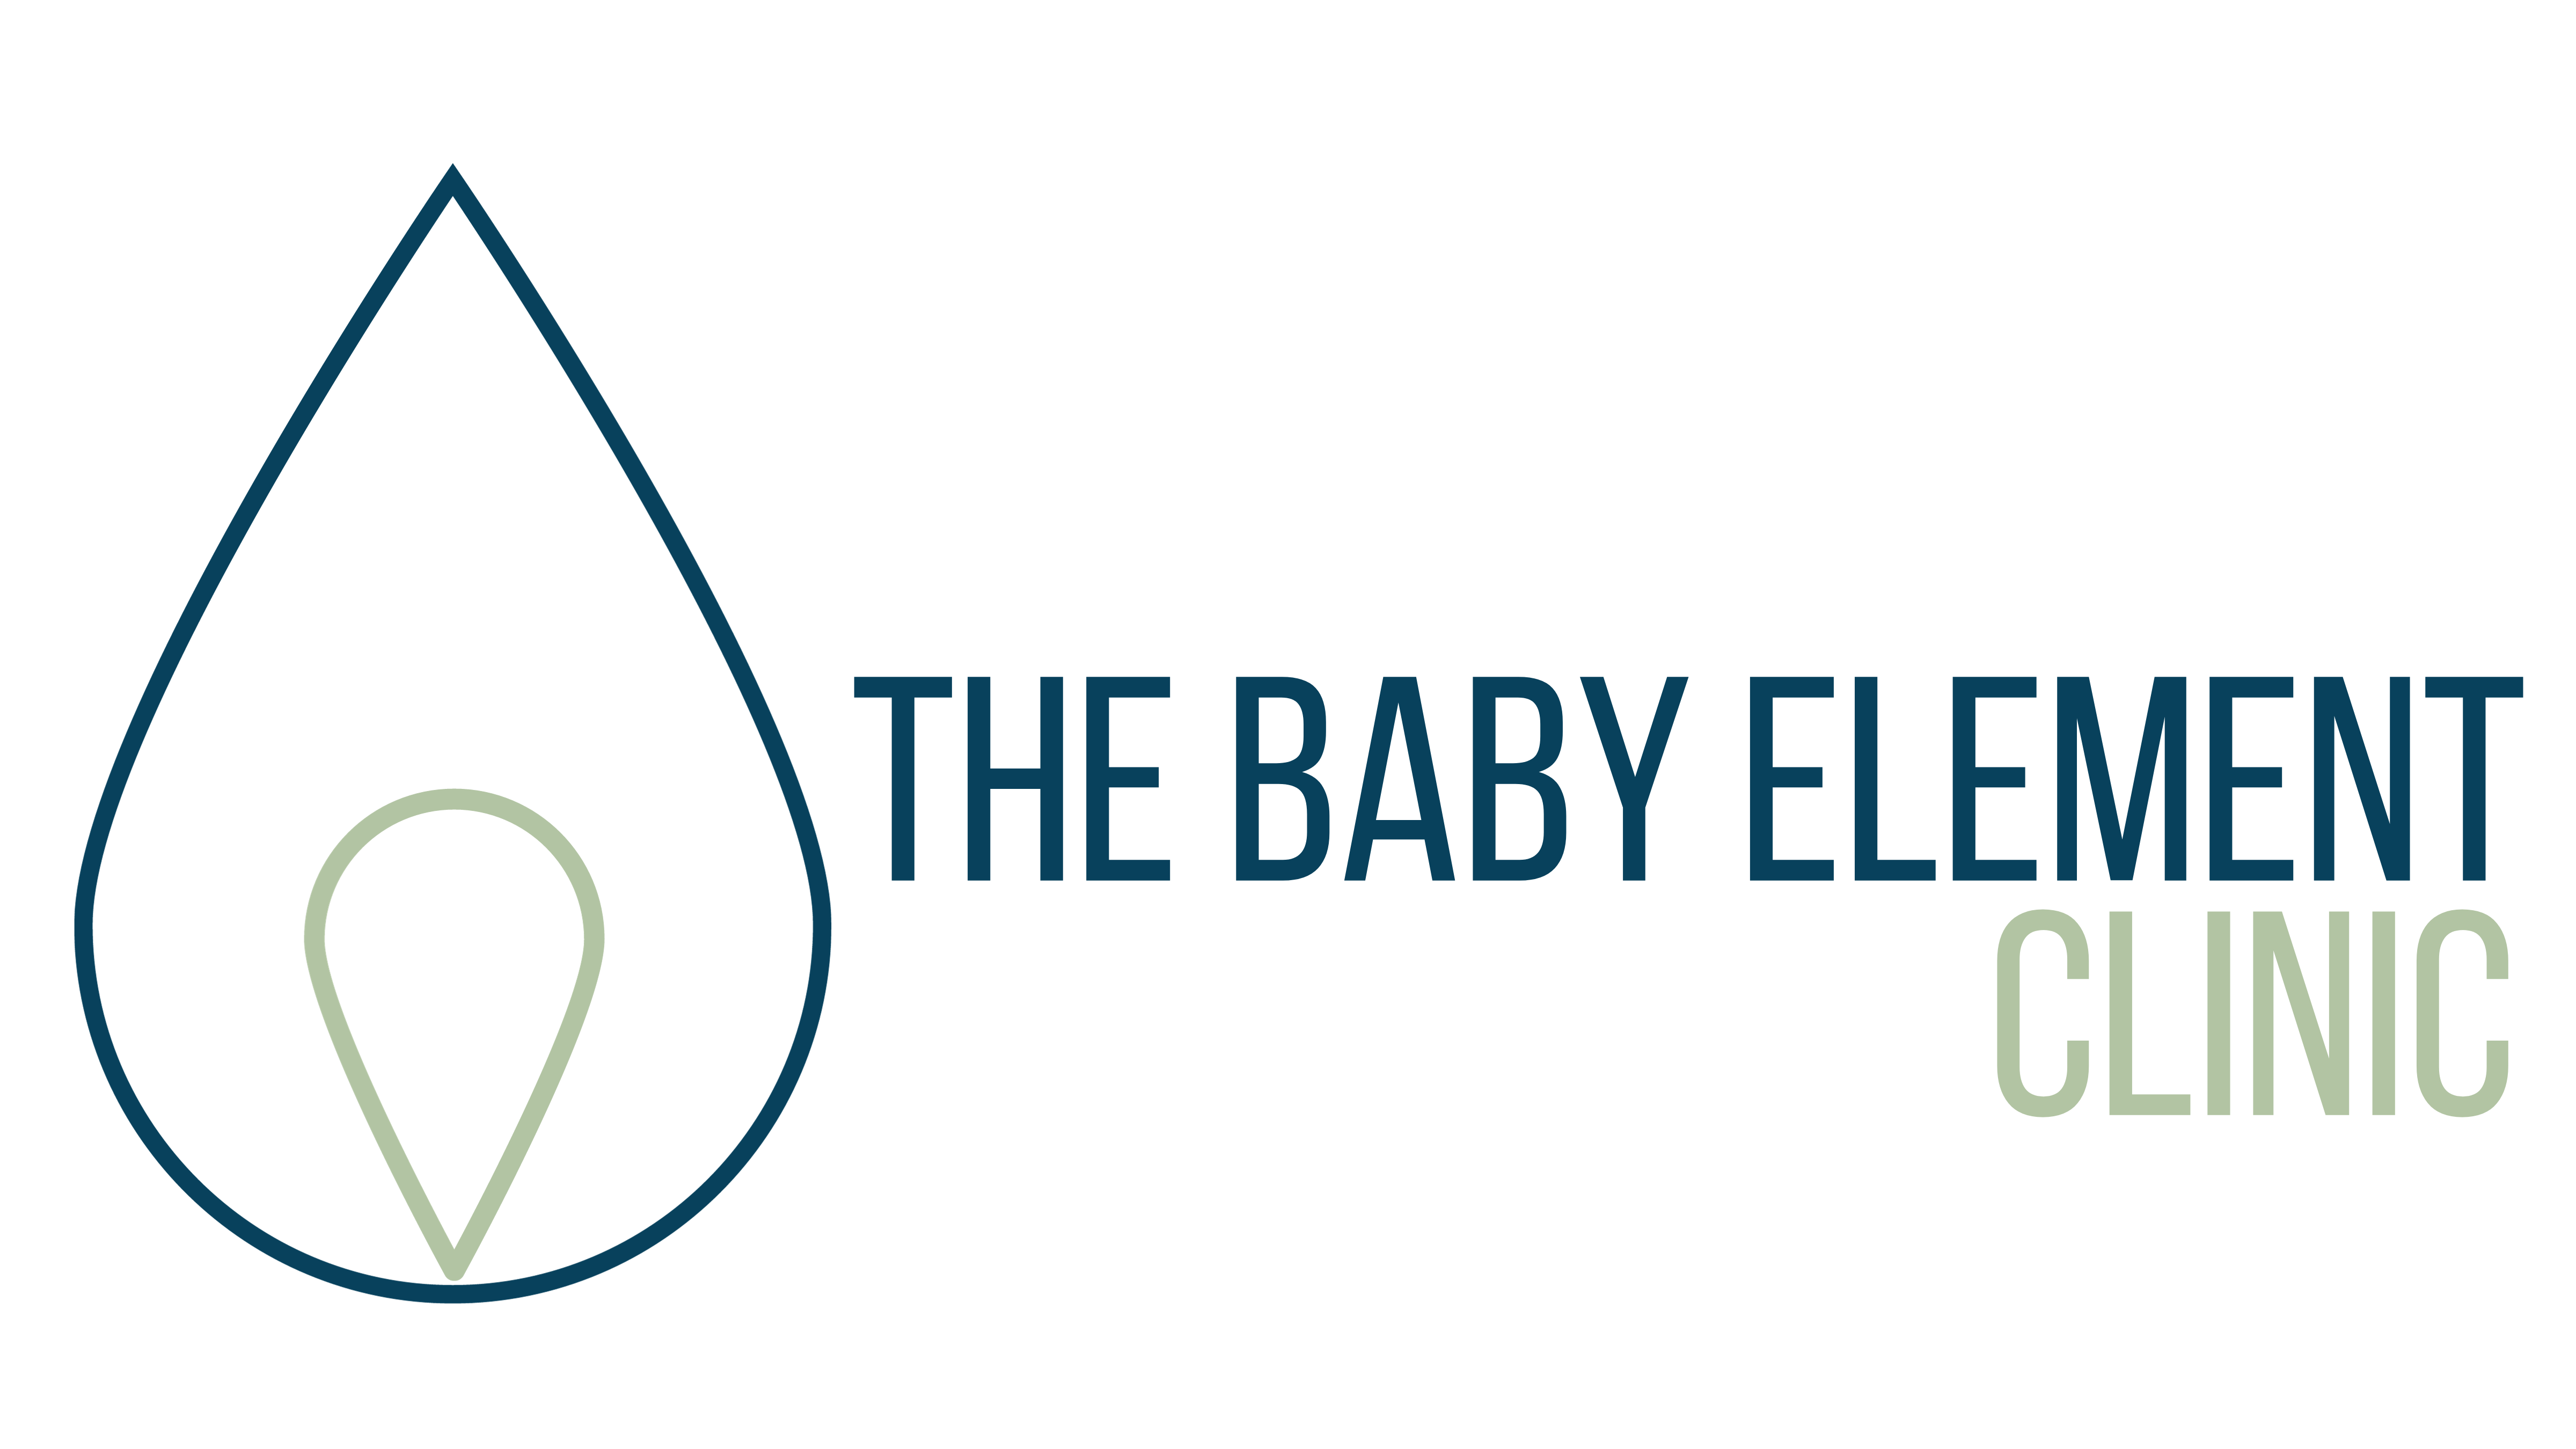 the baby element clinic